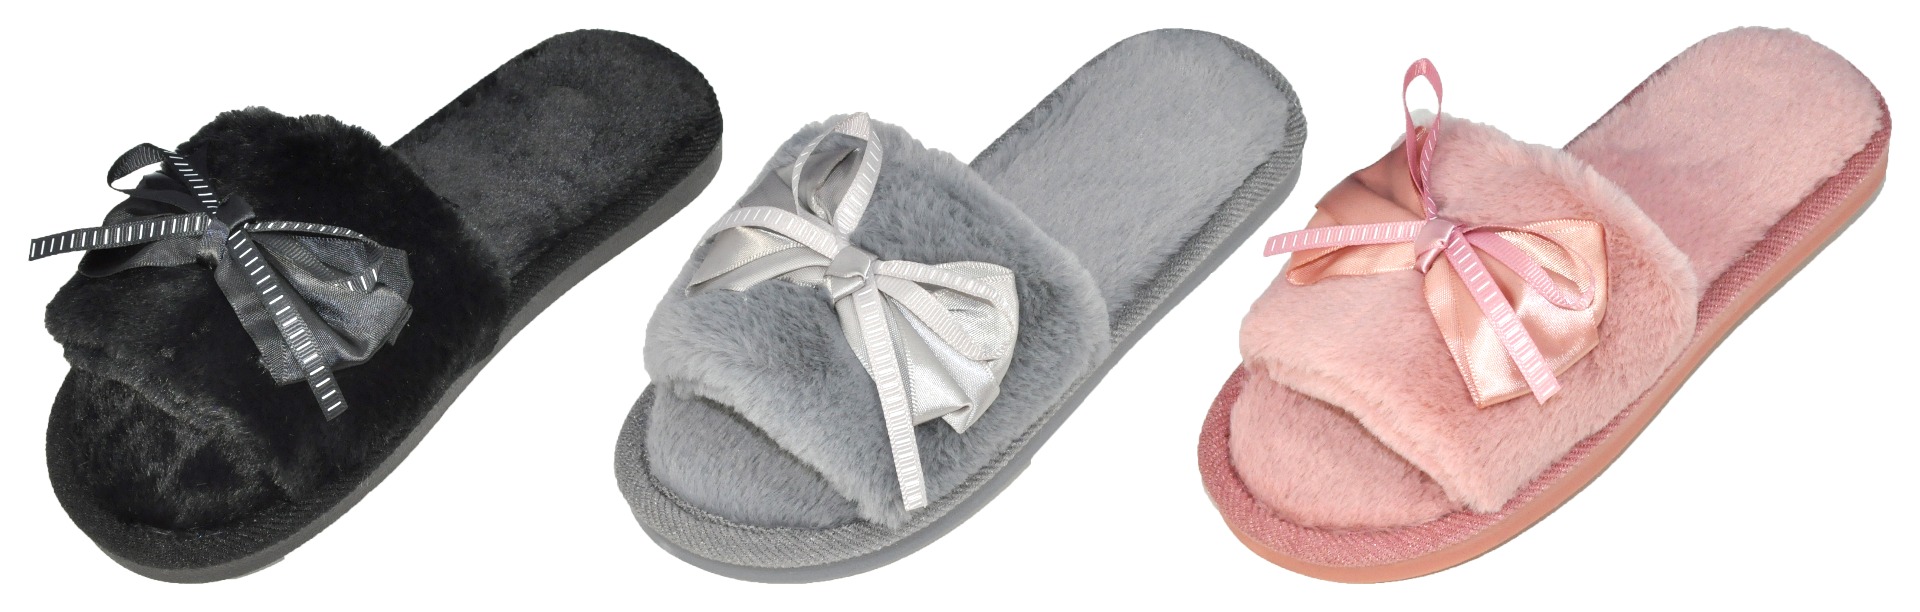 Women's Faux Fur Slide Bedroom SLIPPERS w/ Embroidered Ribbon Bow